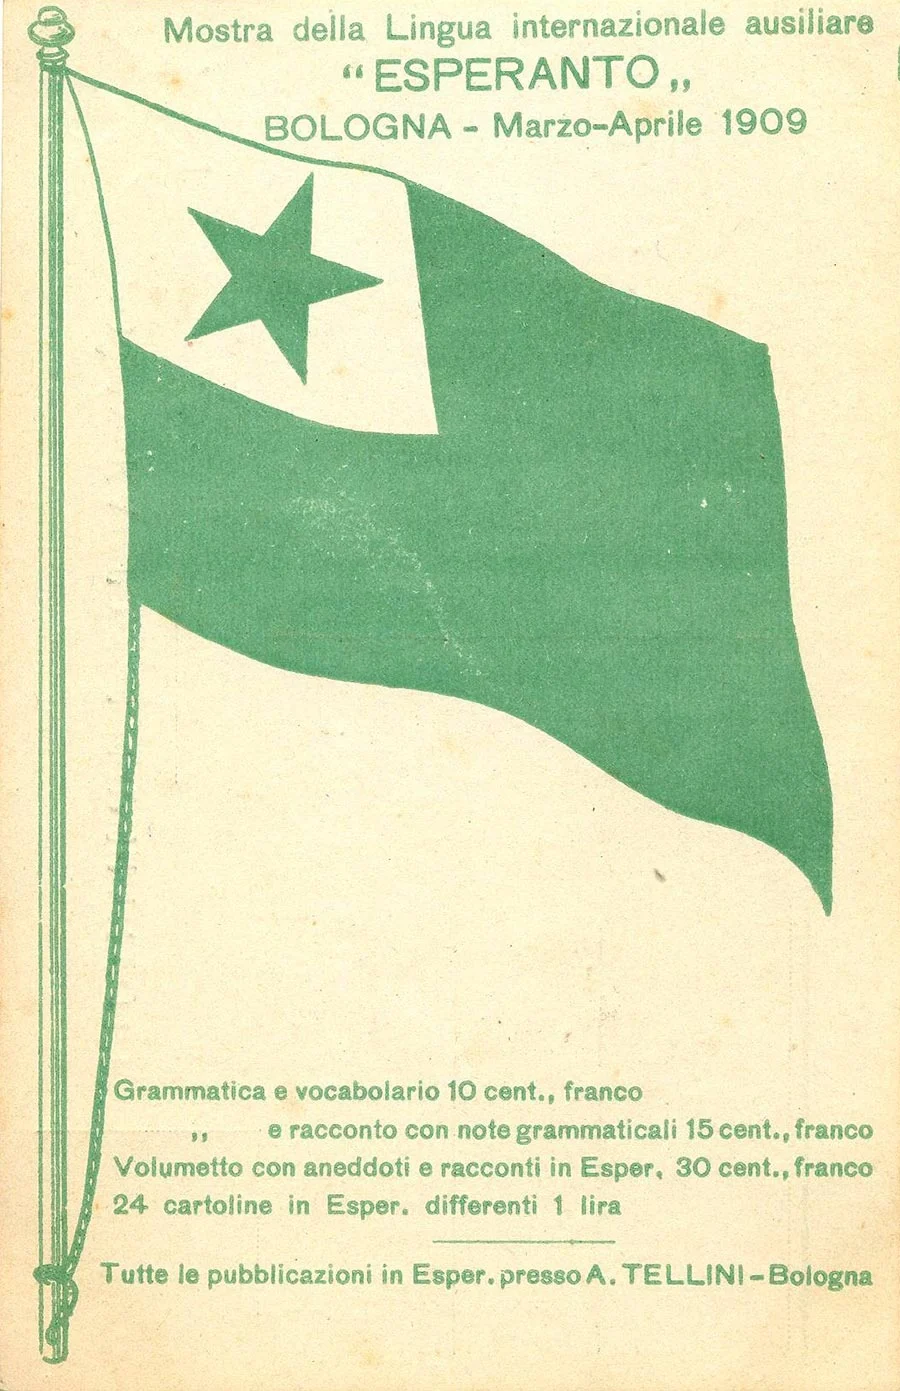 postcard with green flag with a star and text in green